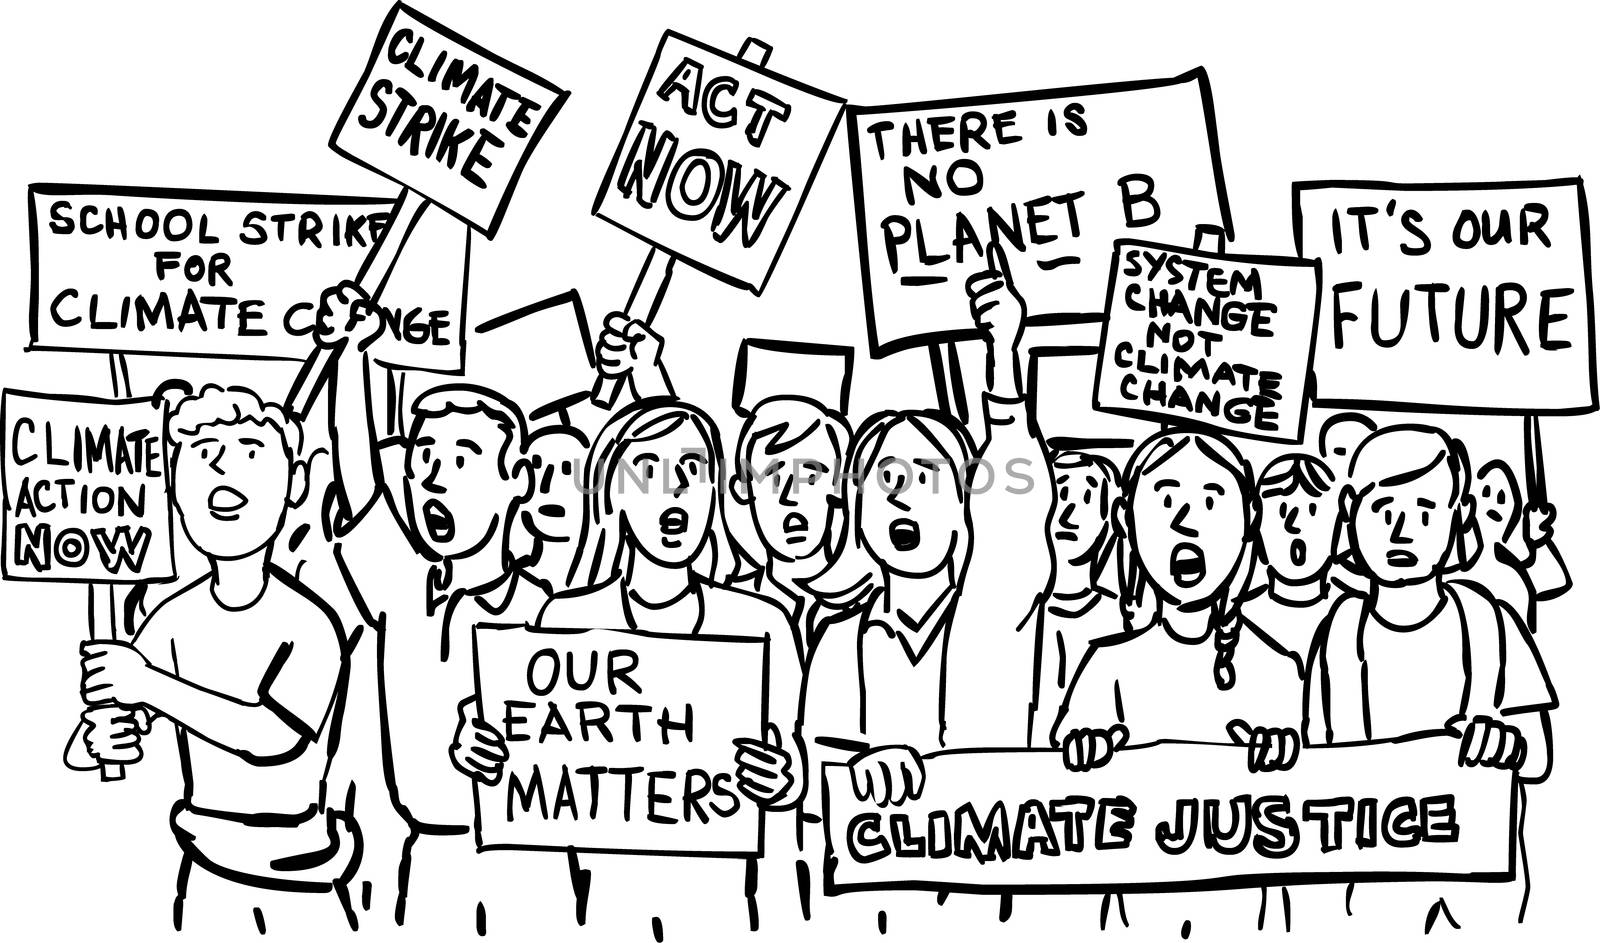 Cartoon style illustration of a group of young students or kids with placards protesting on Climate Change done in black and white on isolated background.